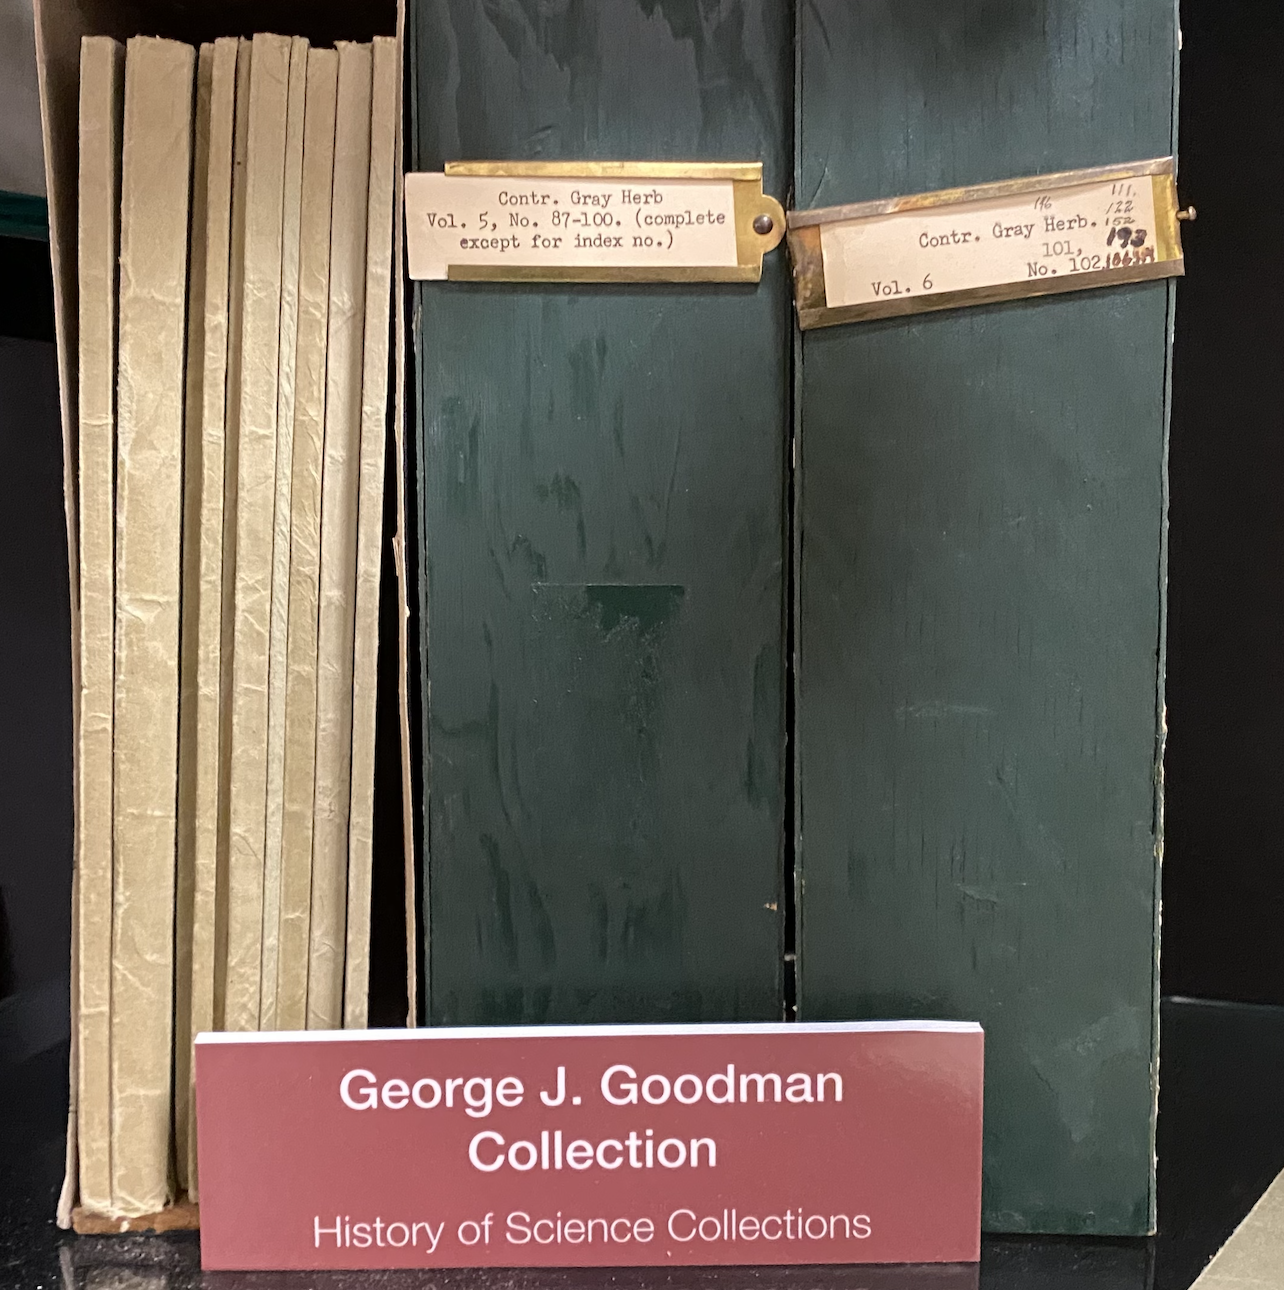 Photo of shelf with print journals and 2 binders and sign for George J. Goodman Collection